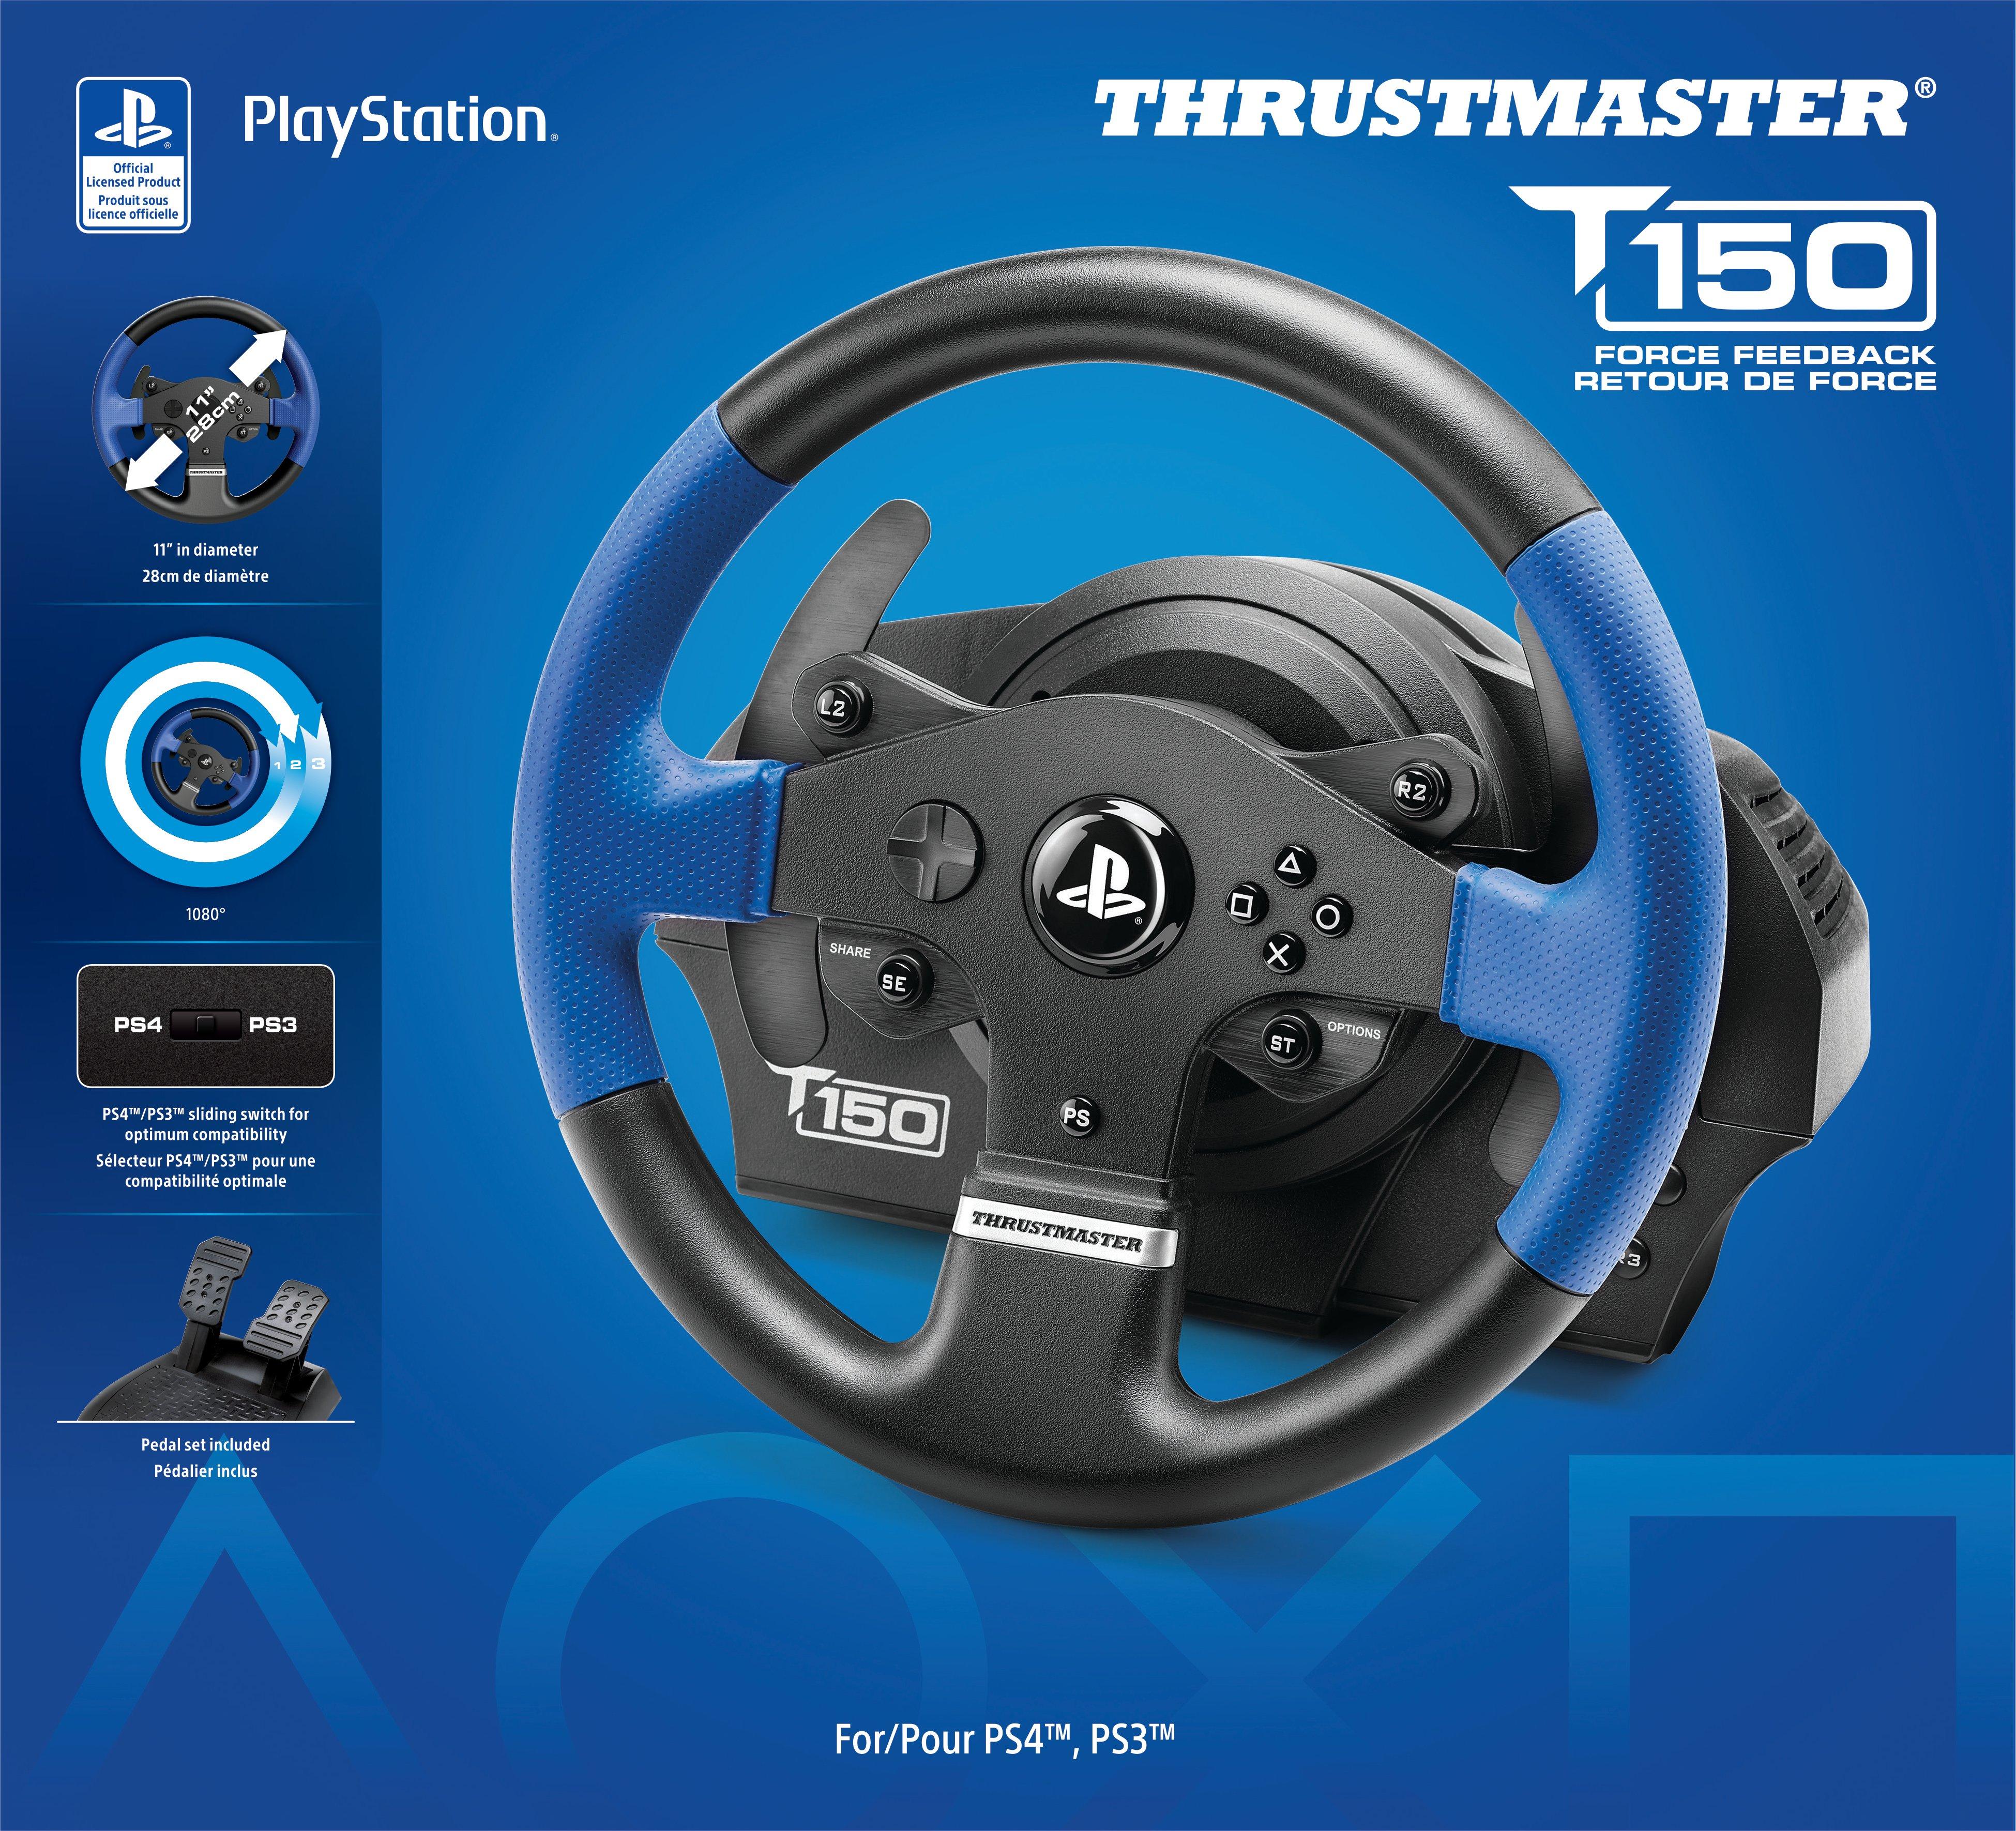 Thrustmaster T300 RS GT Racing Wheel Pedals Adjustable PlayStation 4 PS3 PC